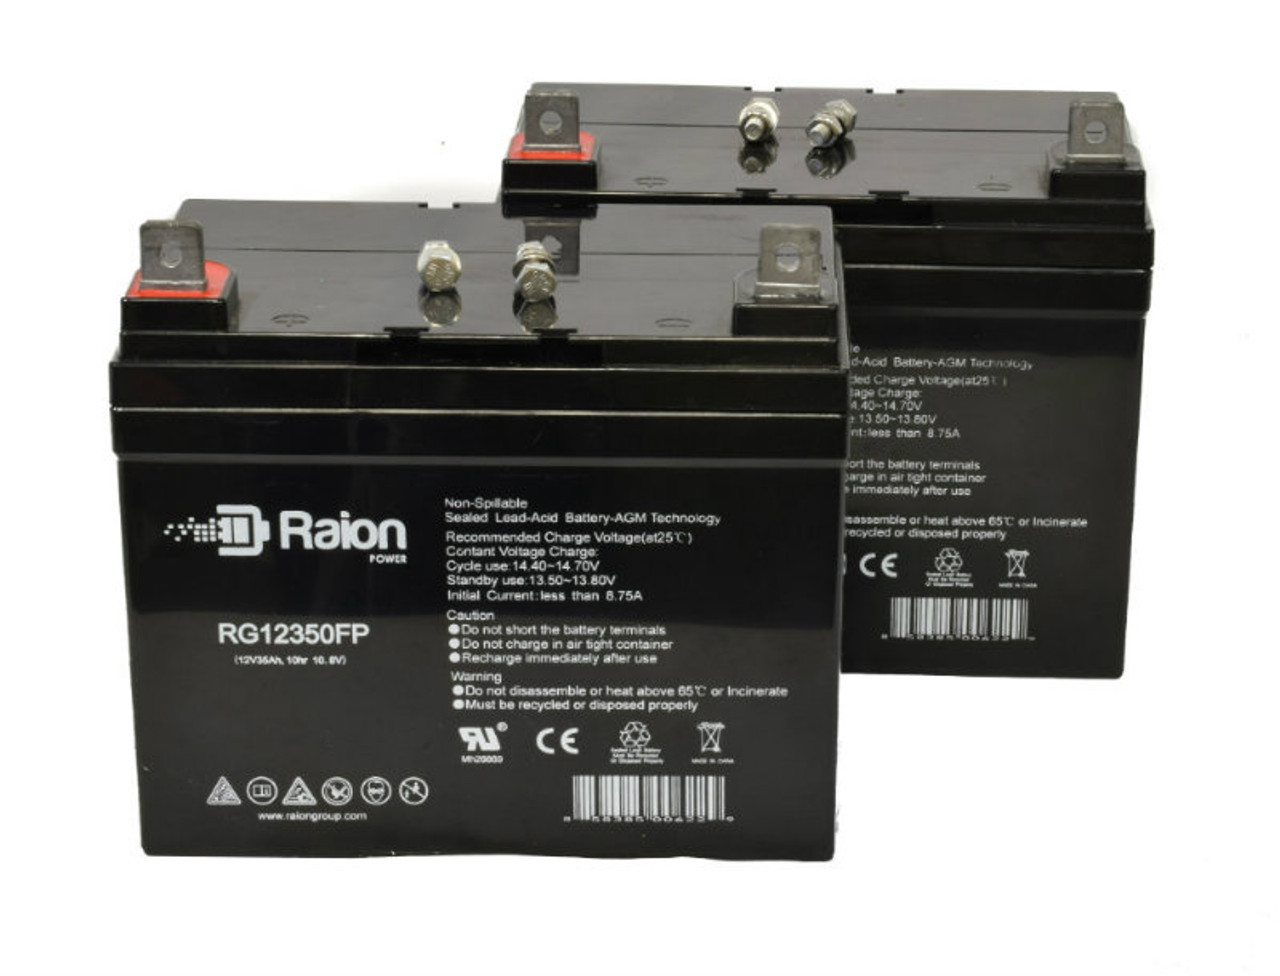 Raion Power 12V 35Ah Replacement UPS Battery for Topaz R1234 - 2 Pack